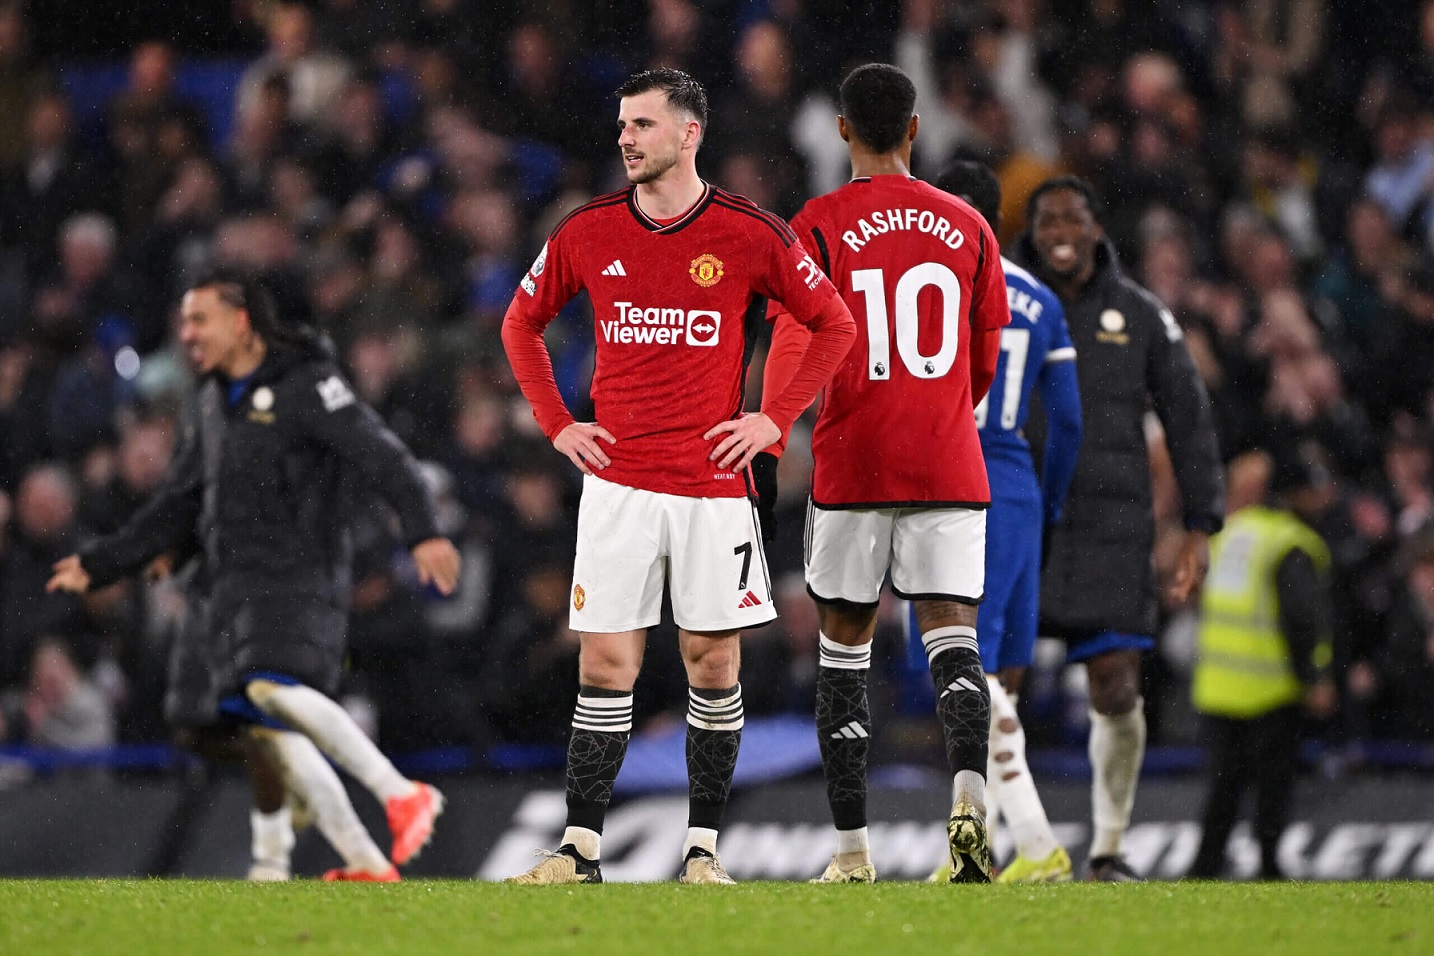 What Chelsea fans chanted at Mason Mount during Man United win